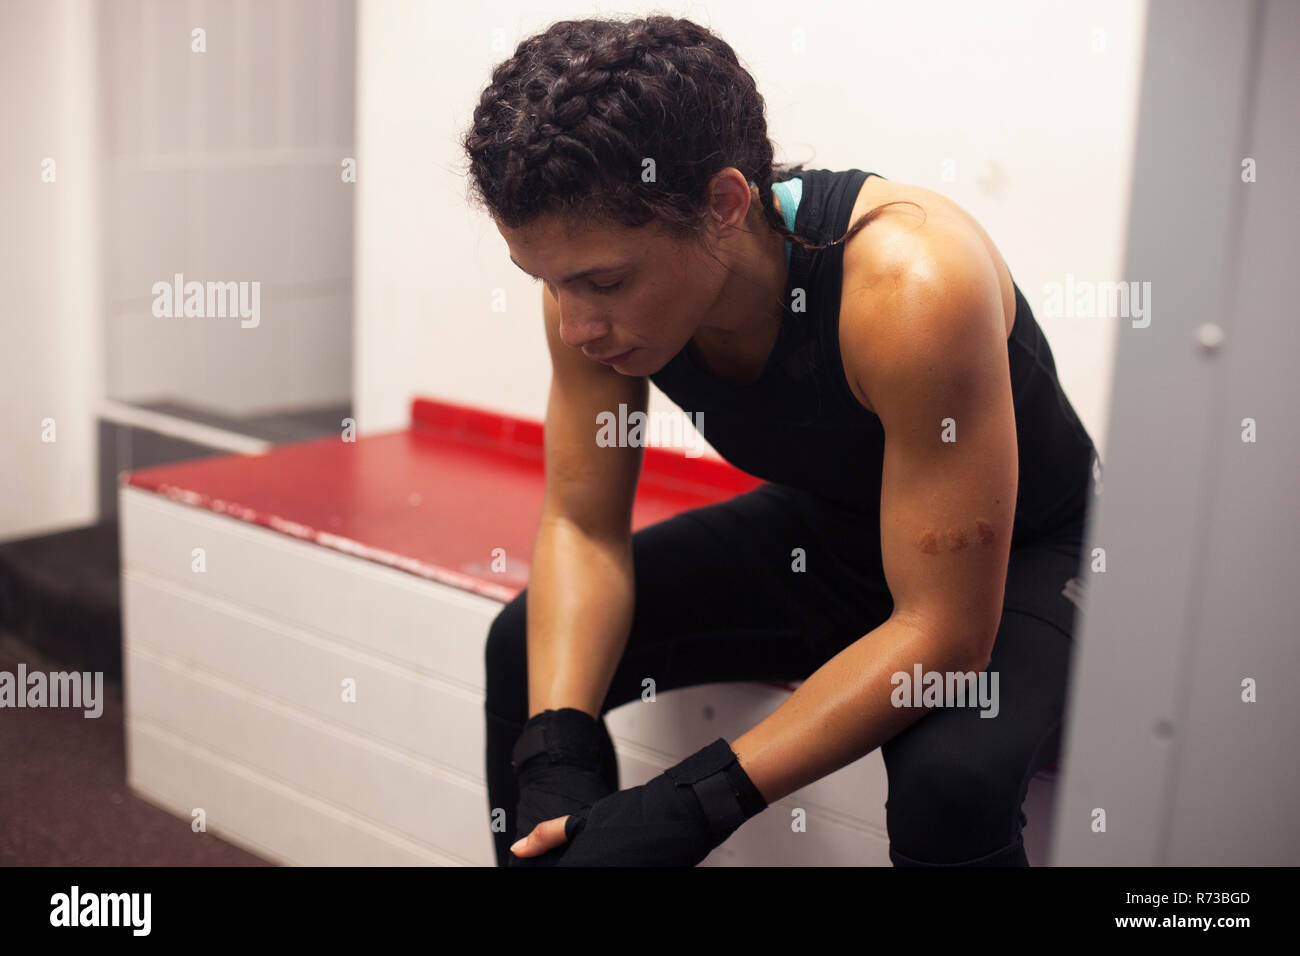 Female boxer resting in gym Stock Photo